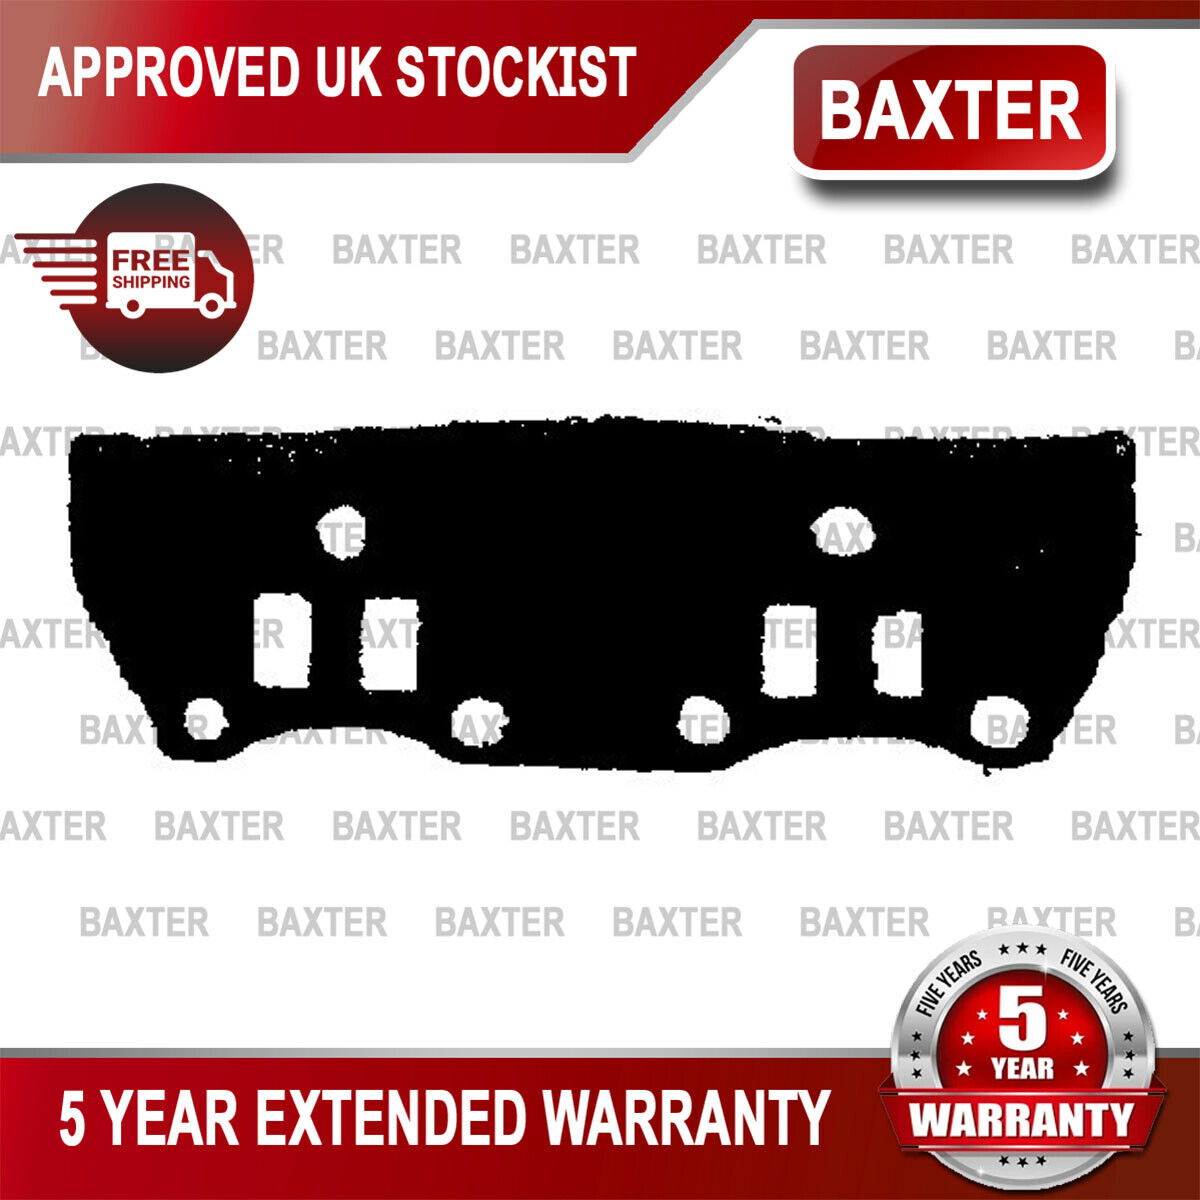 Fits Colt Compact Wira Satria 1.3 1.5 Baxter Exhaust Manifold Gasket MD150525